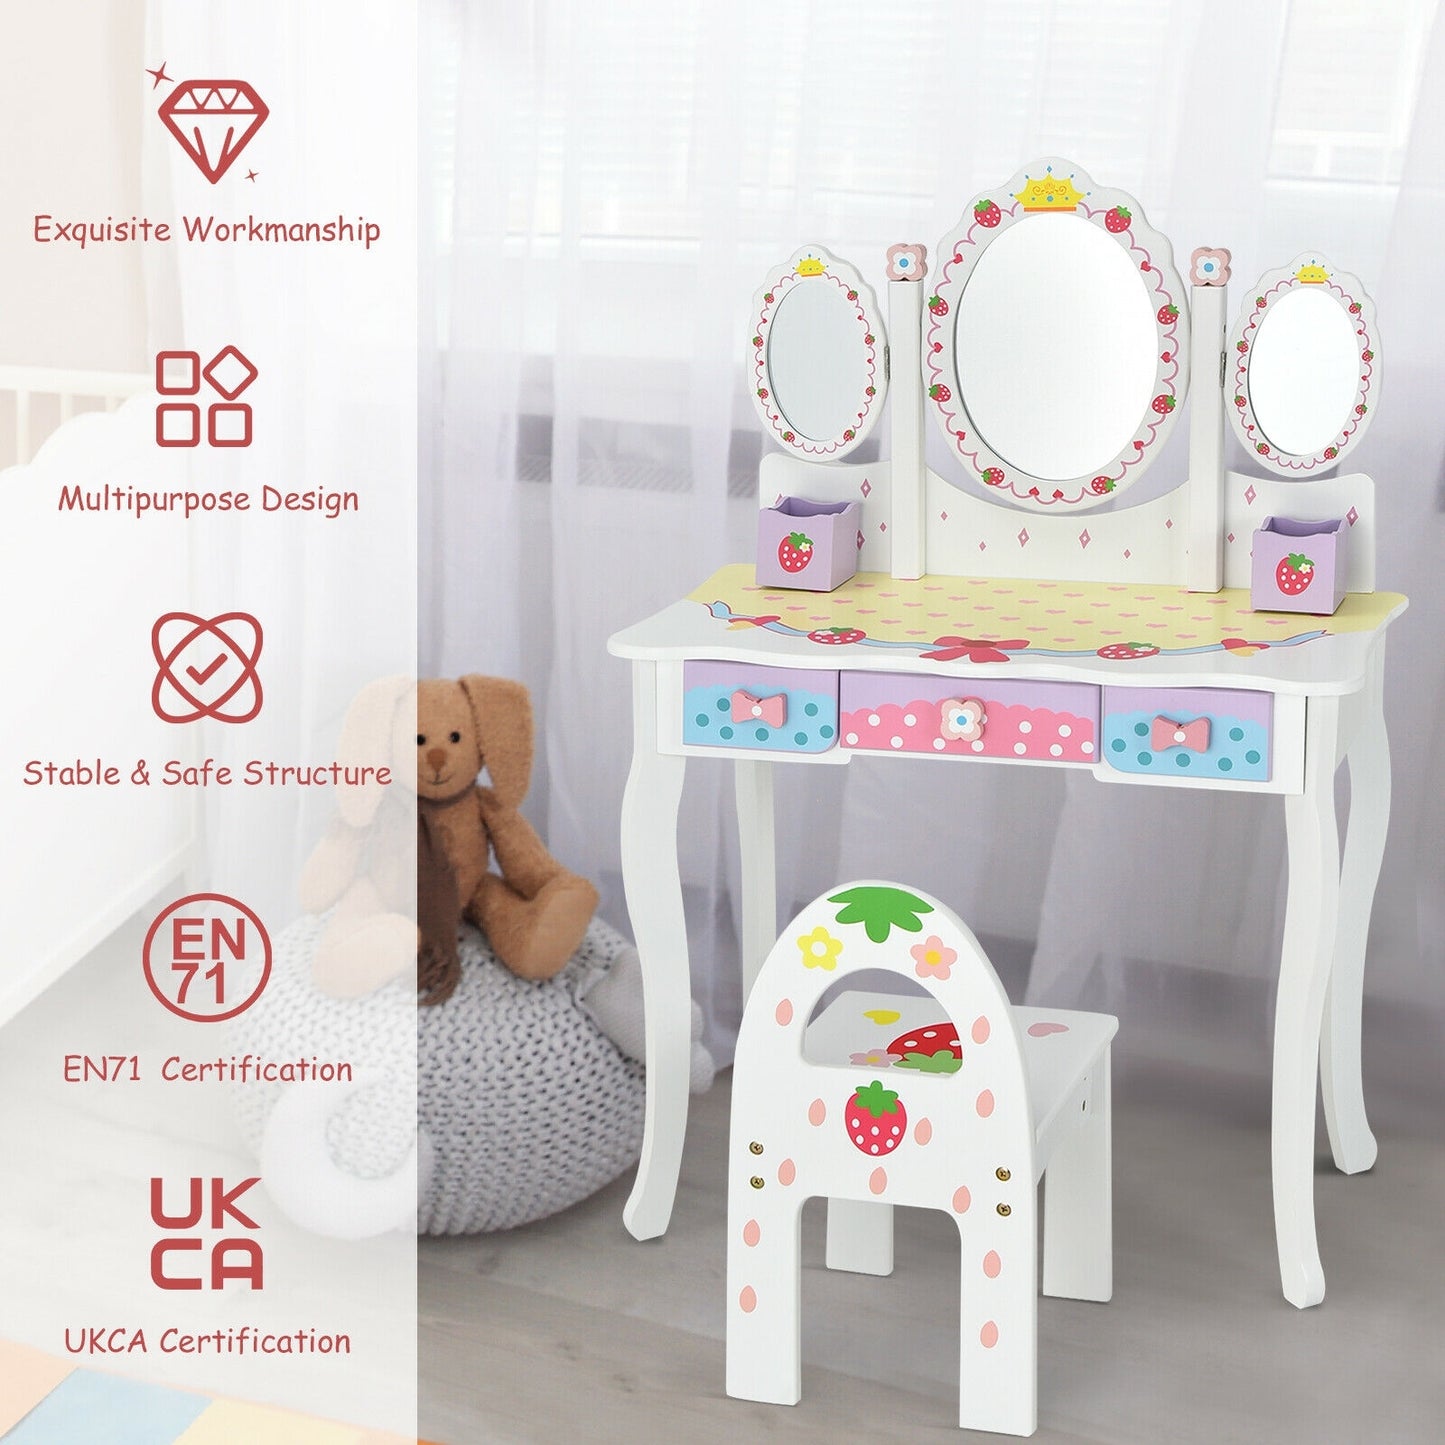 Kids Vanity Princess Makeup Dressing Table Chair Set with Tri-fold Mirror-White